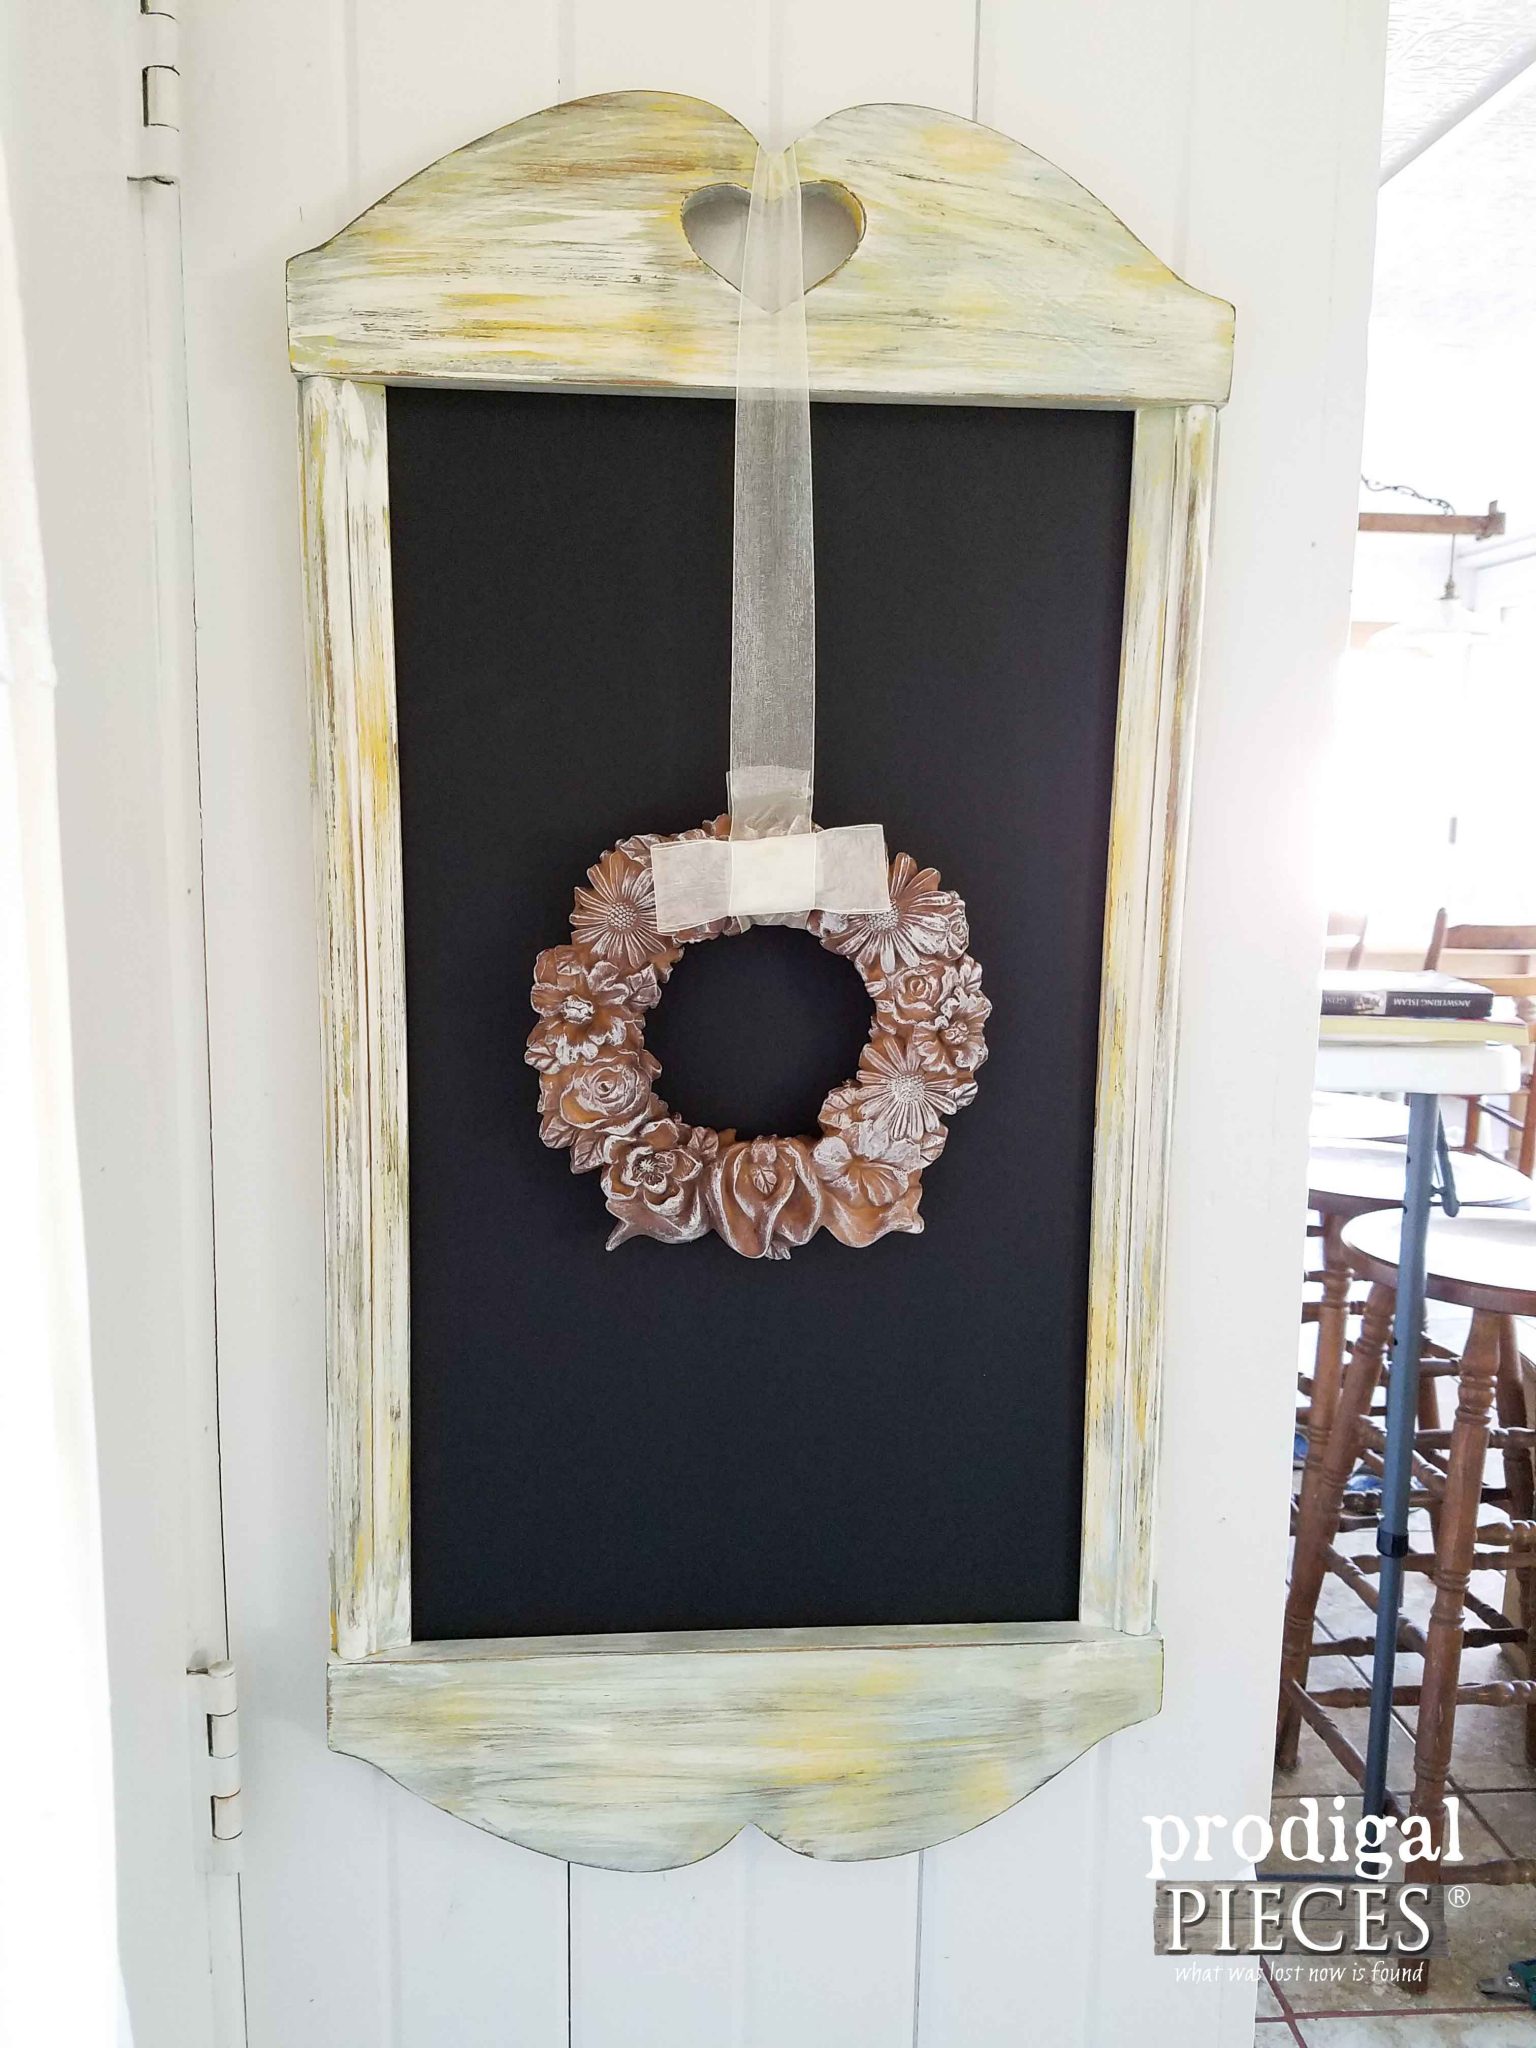 Thrifted Frame Repurposed into Rustic Chalkboard by Prodigal Pieces | prodigalpieces.com